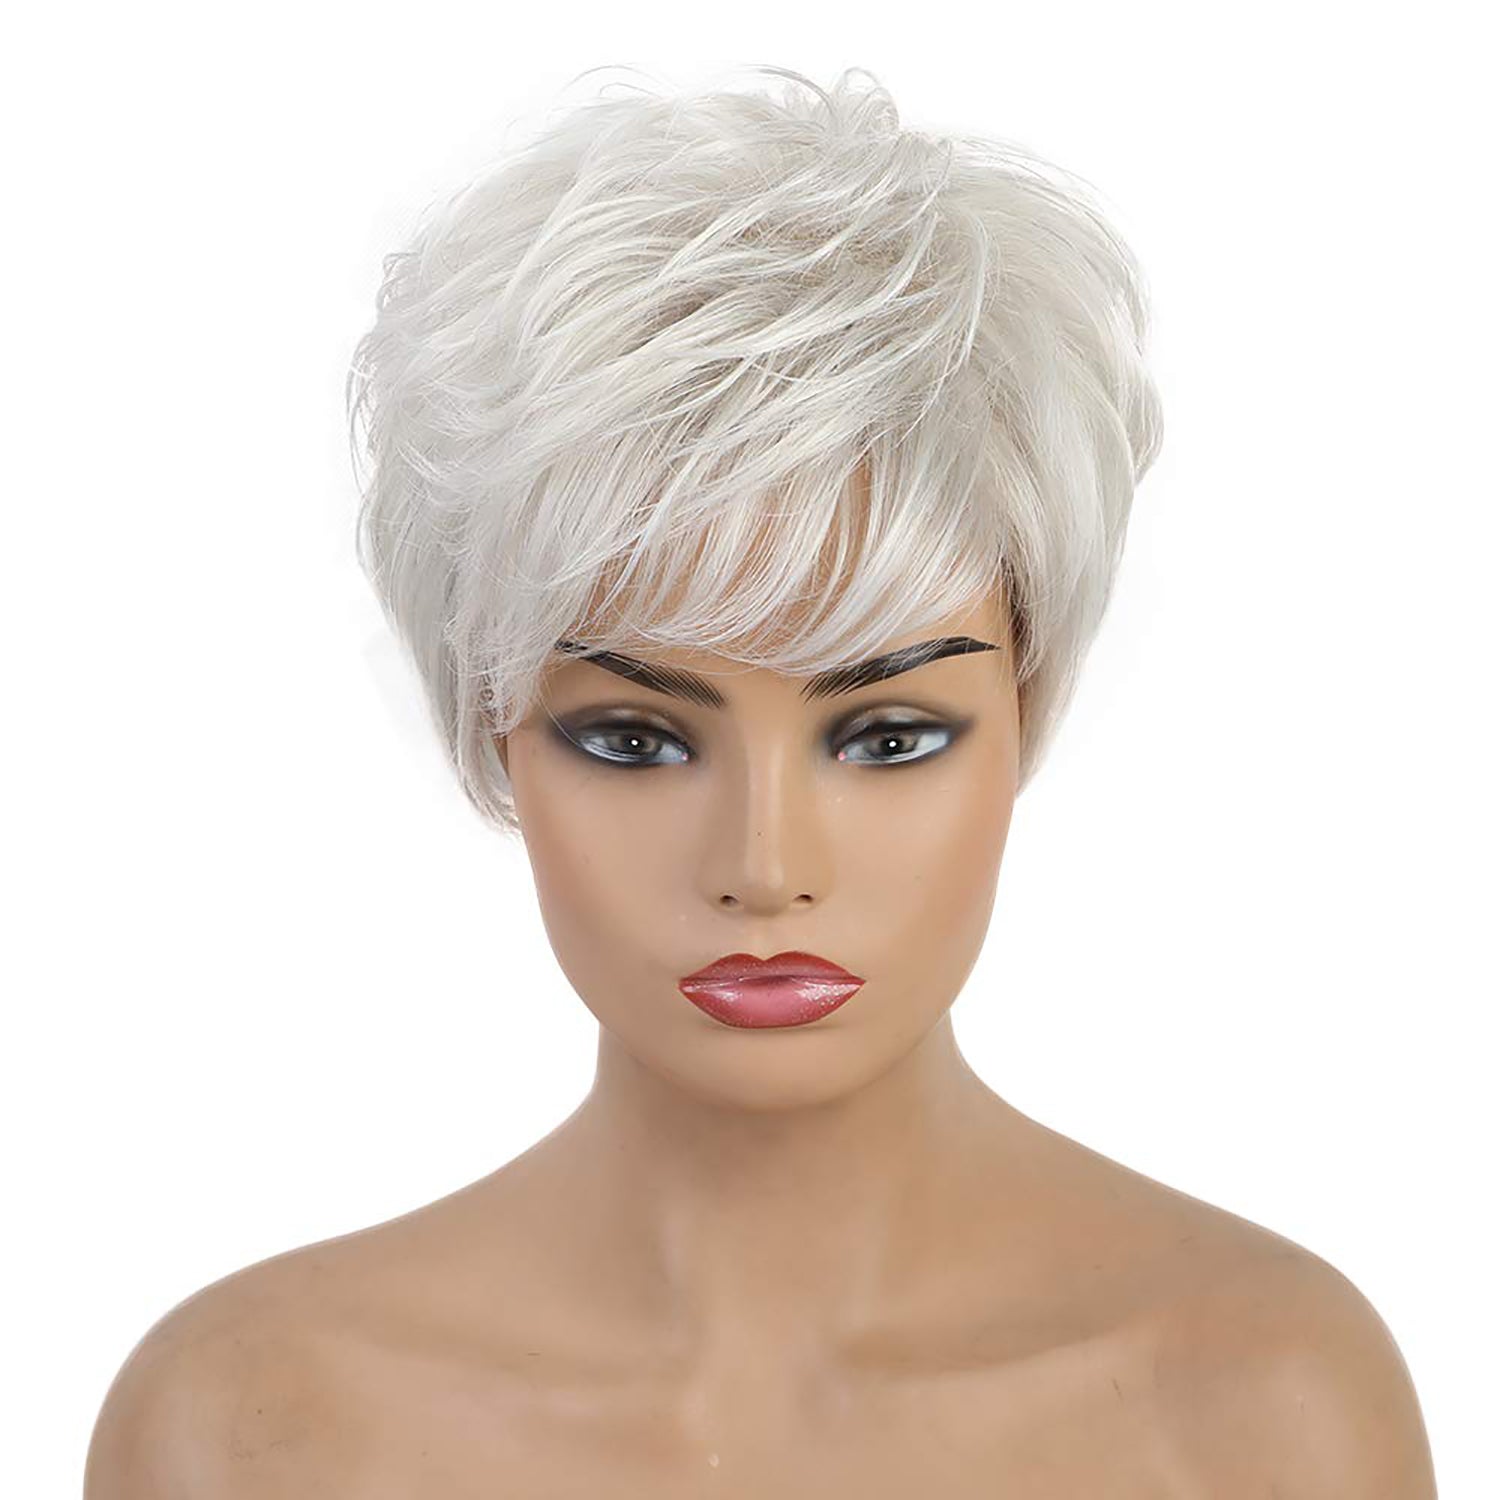 0 Degree | Ash Blonde Short Pixie Cut Wavy Synthetic Hair Wig